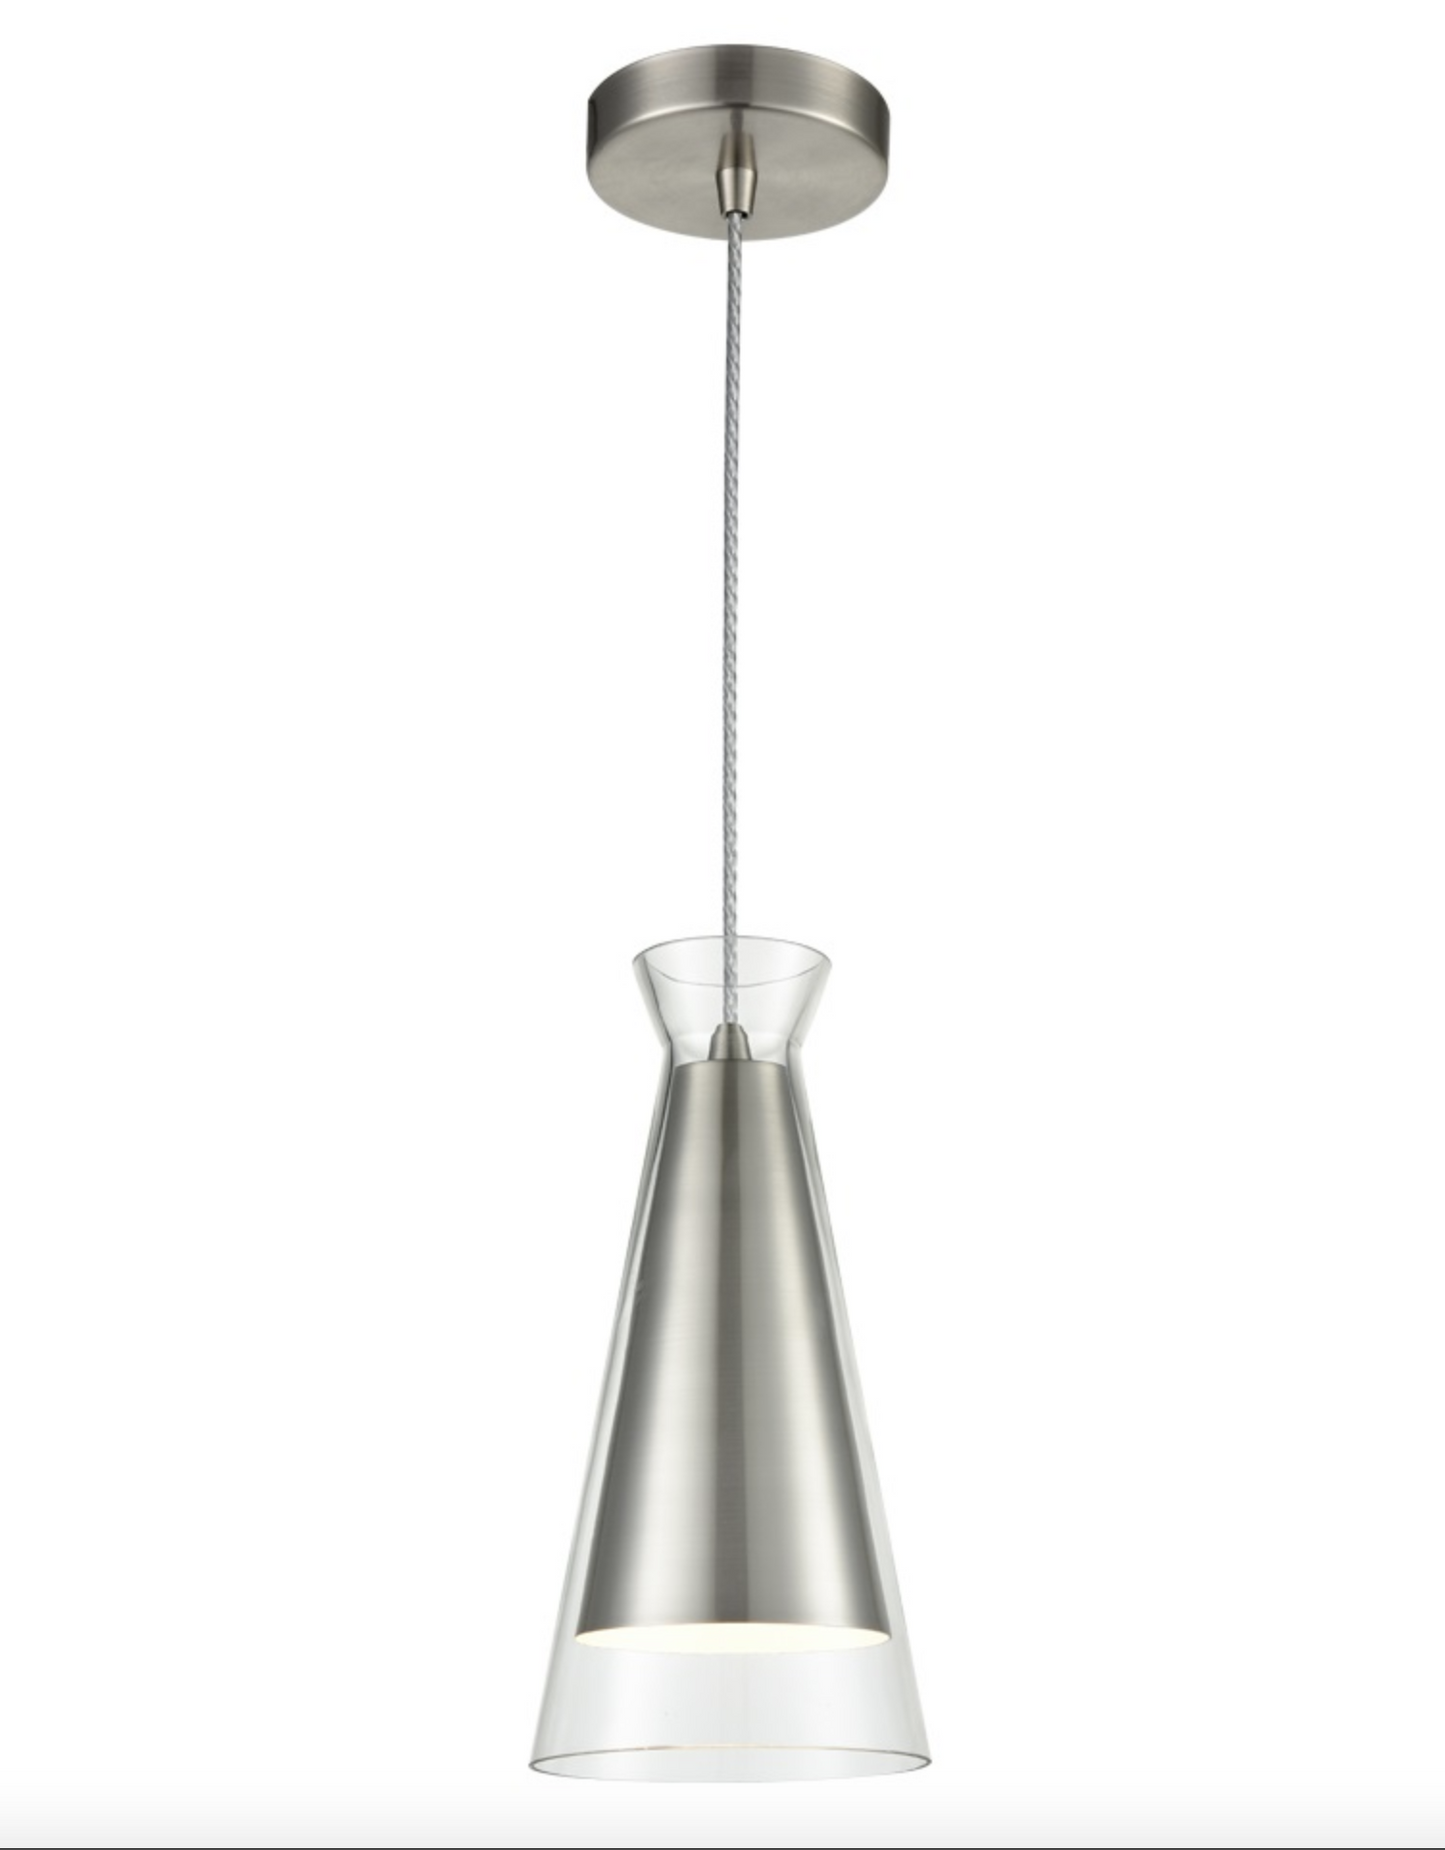 Balintore Satin Nickel and Clear Glass Single Pendant - ID 6827